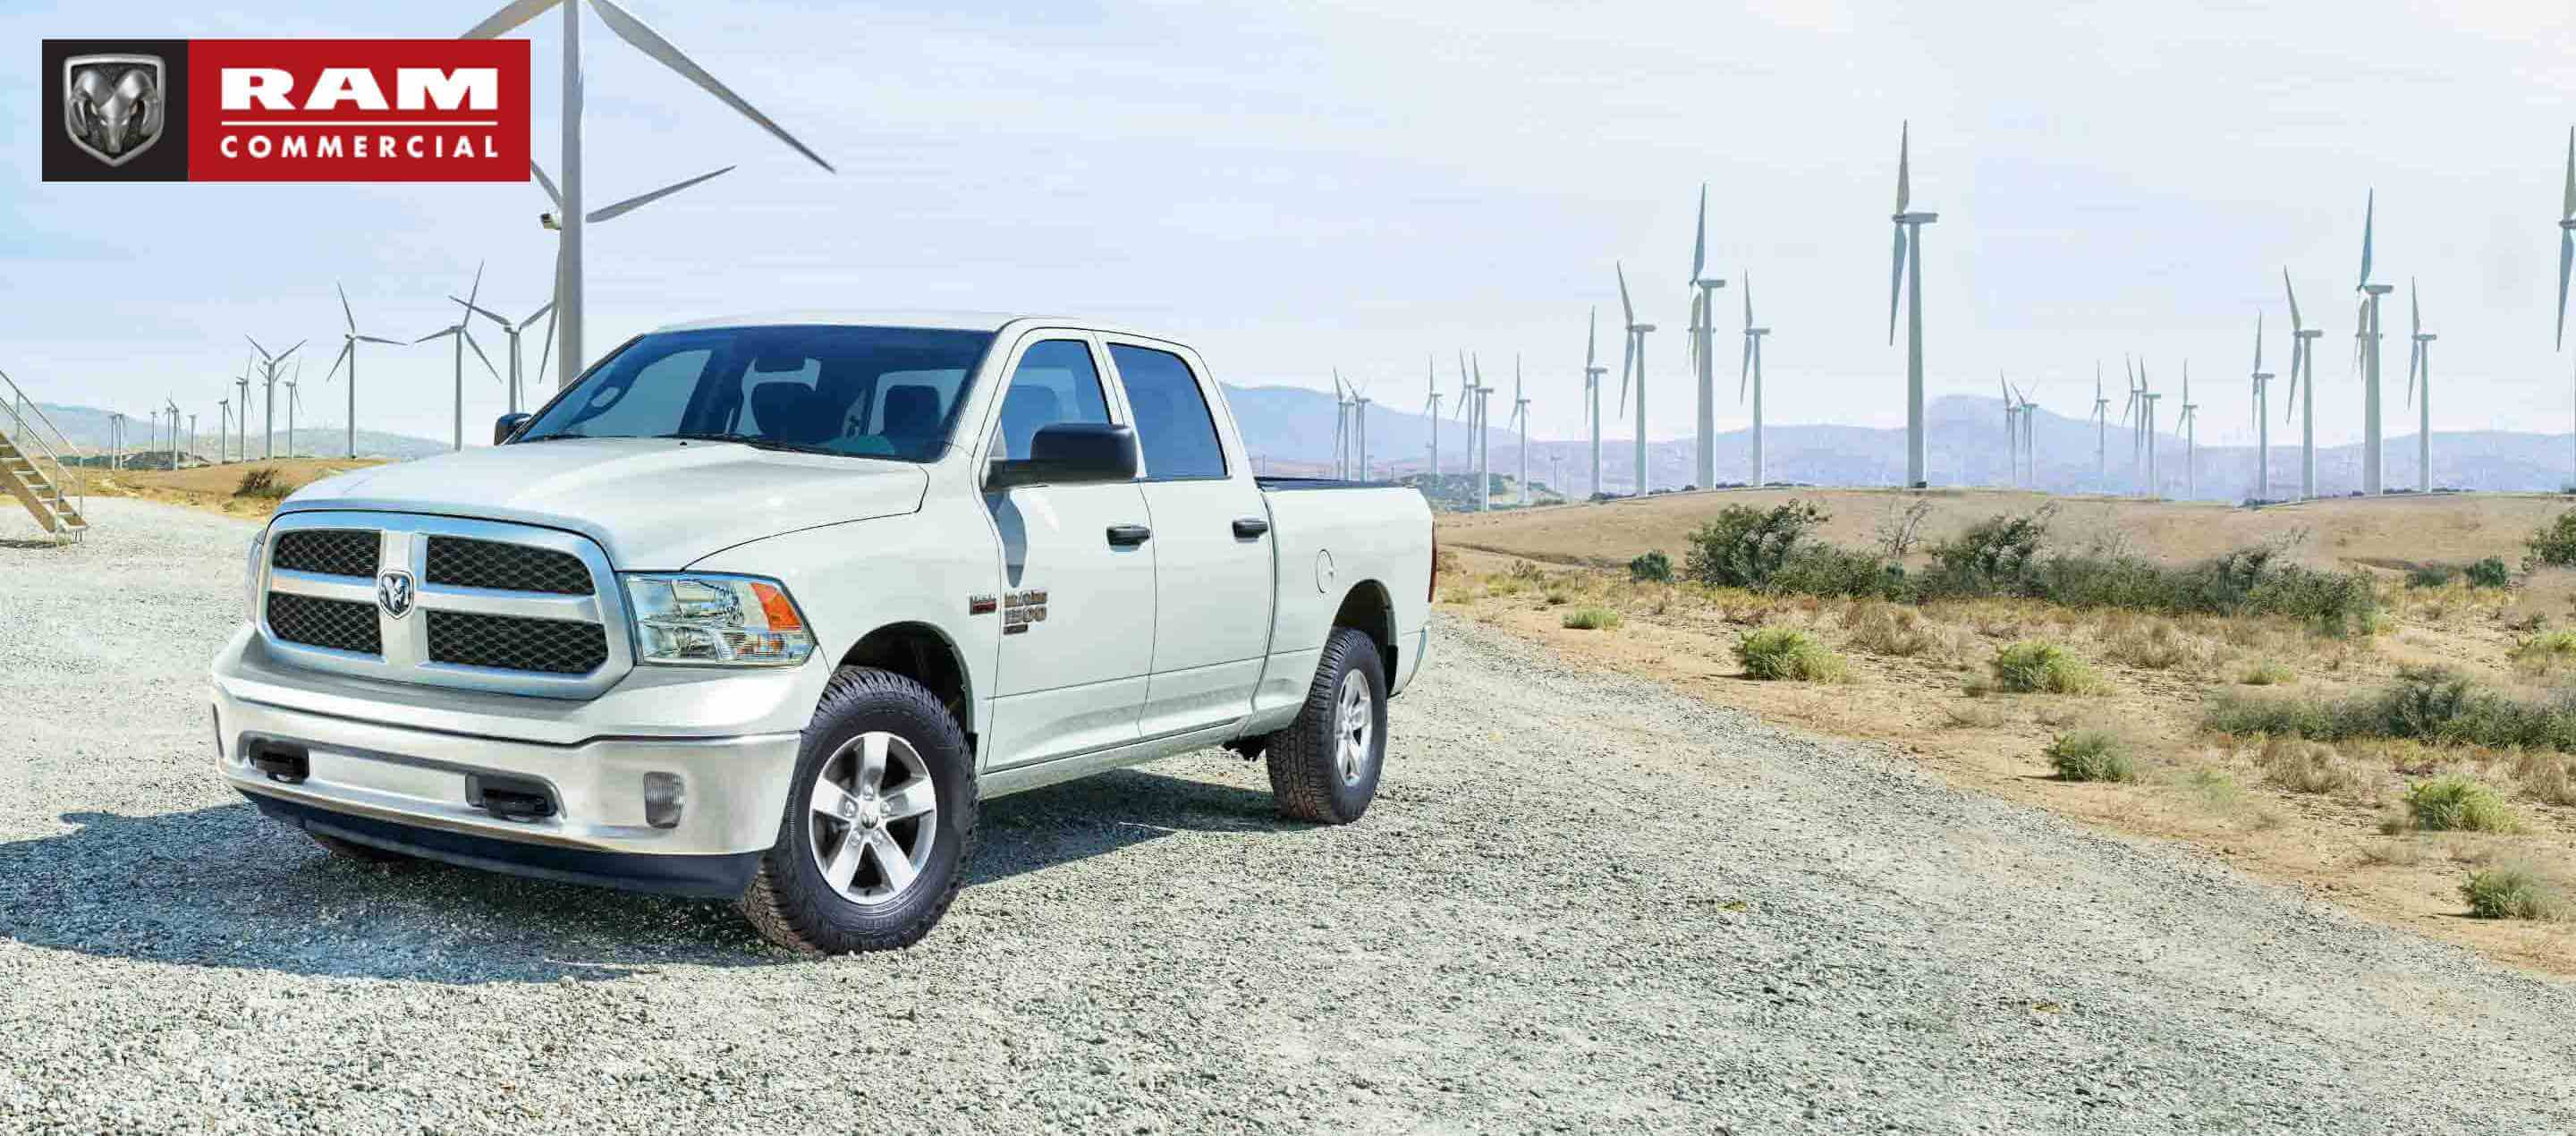 A white 2023 Ram 1500 Classic Tradesman Crew Cab parked beside a field of windmills. Ram Commercial.